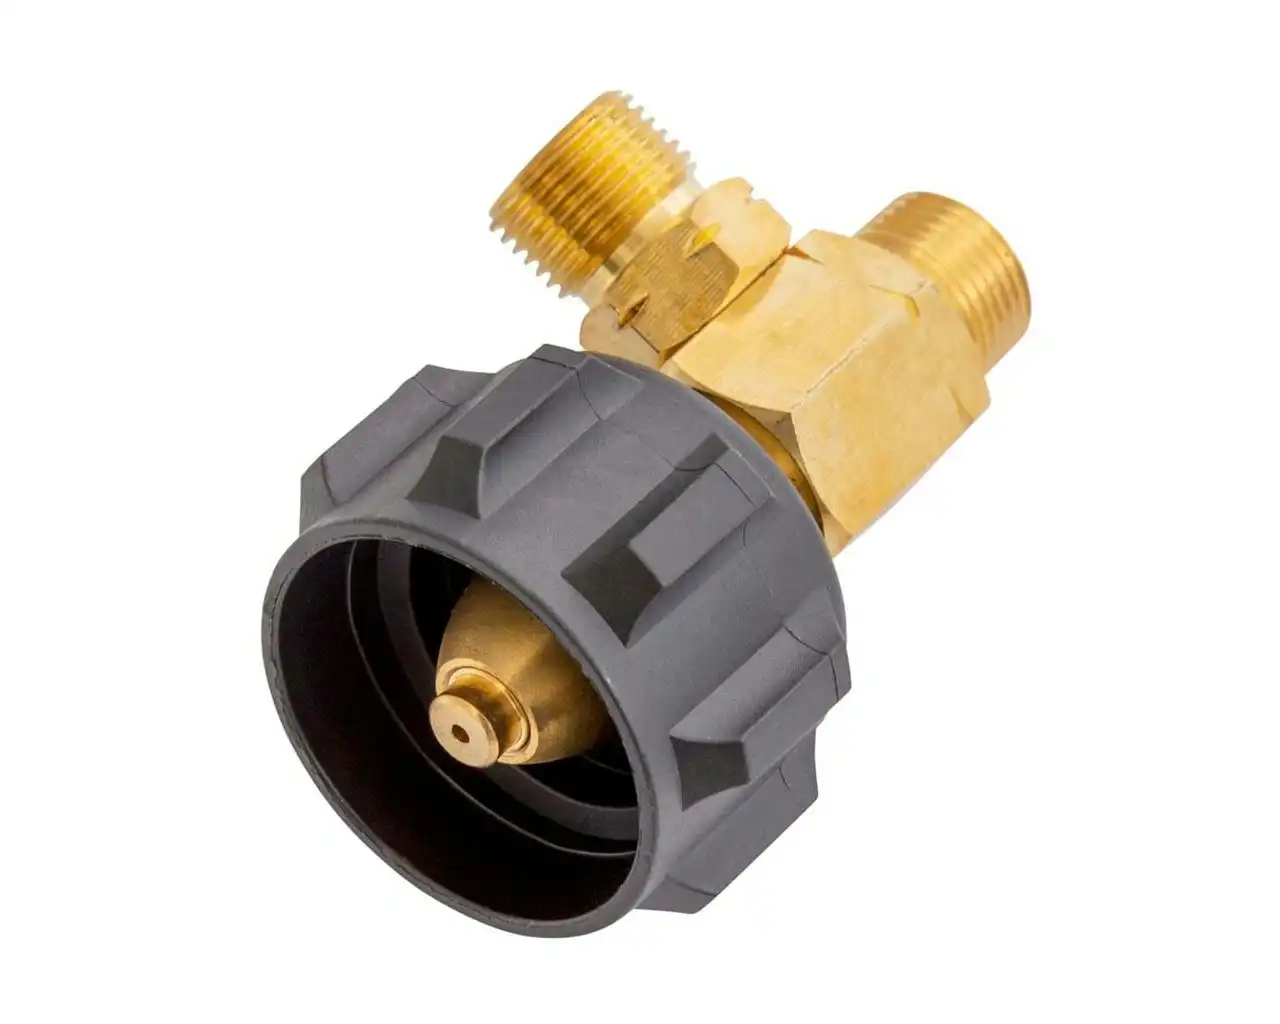 Gasmate Adaptor - LCC27 TO TWIN 3/8 BSPP LH